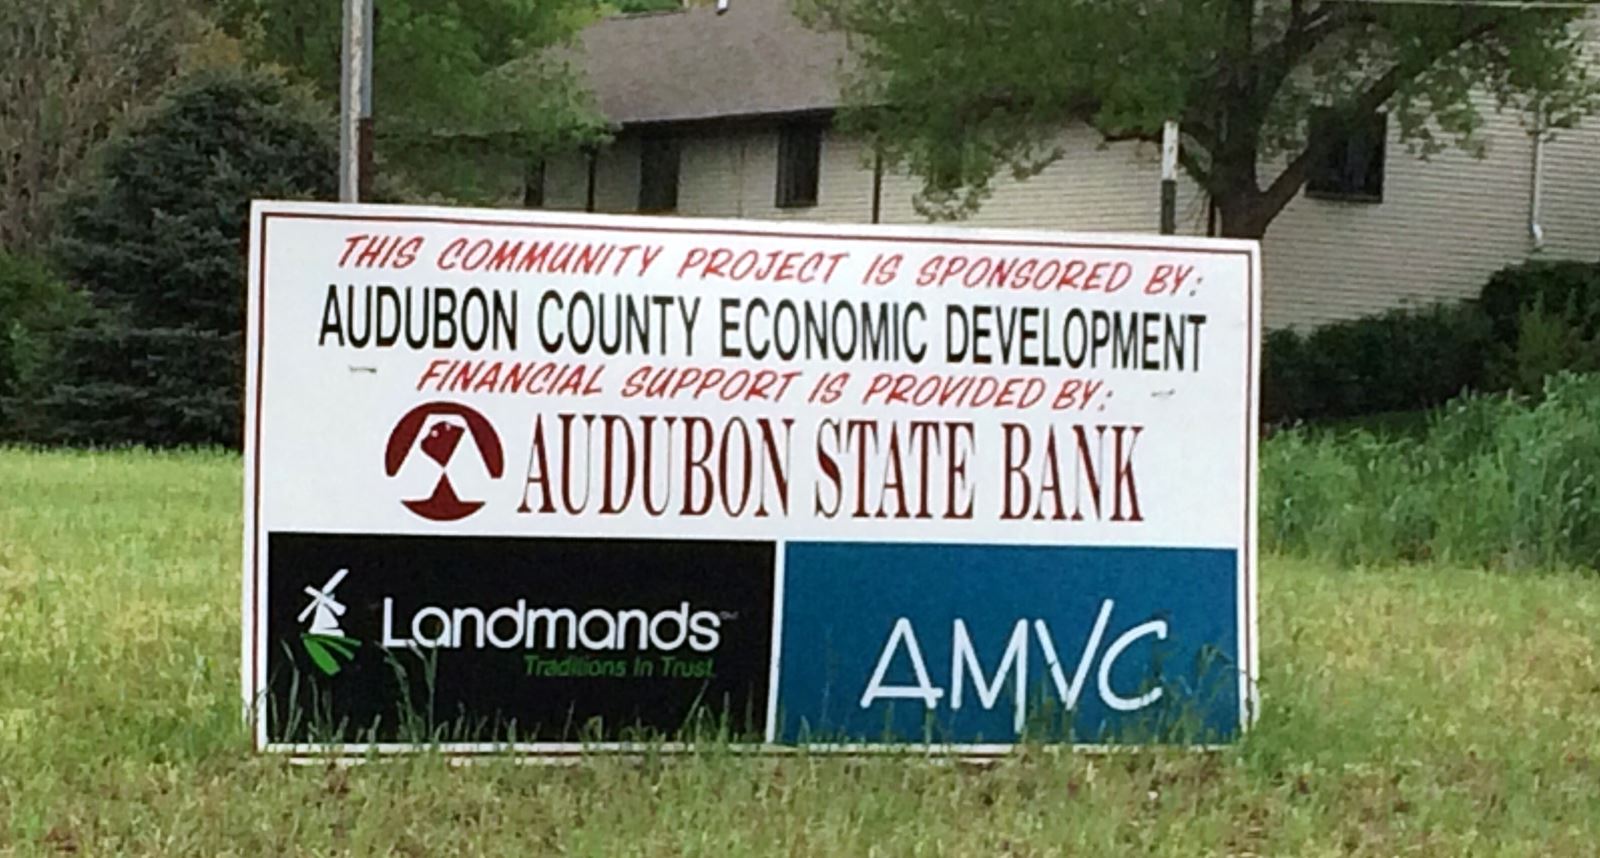 AMVC donates to housing fund with Audubon State Bank and Landmands Bank